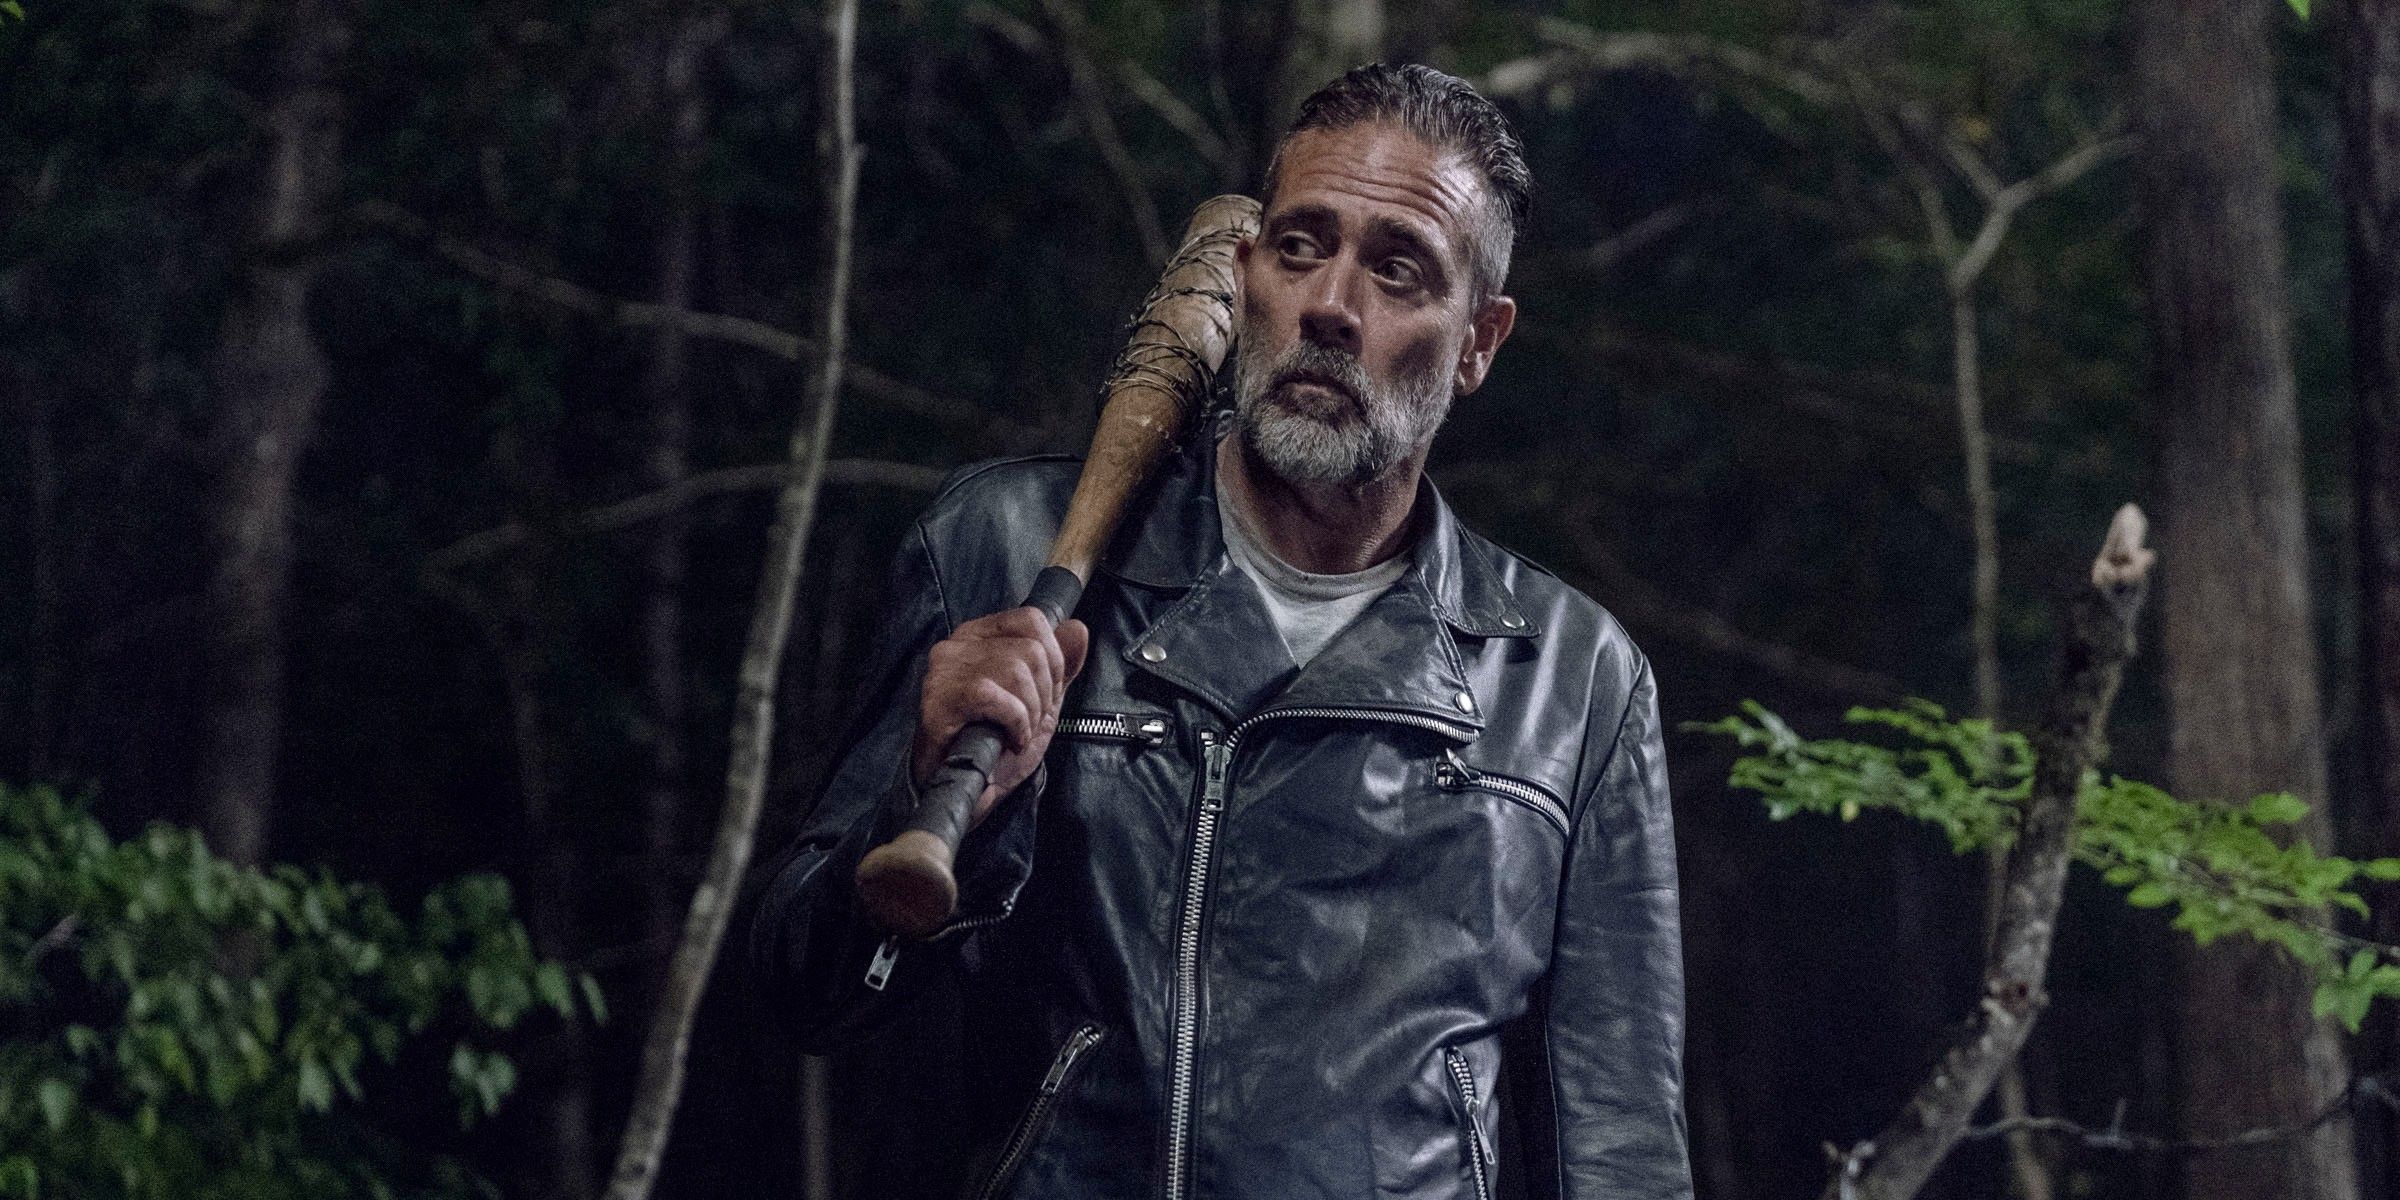 Jeffrey Dean Morgan as Negan in The Walking Dead with Lucille on his shoulder